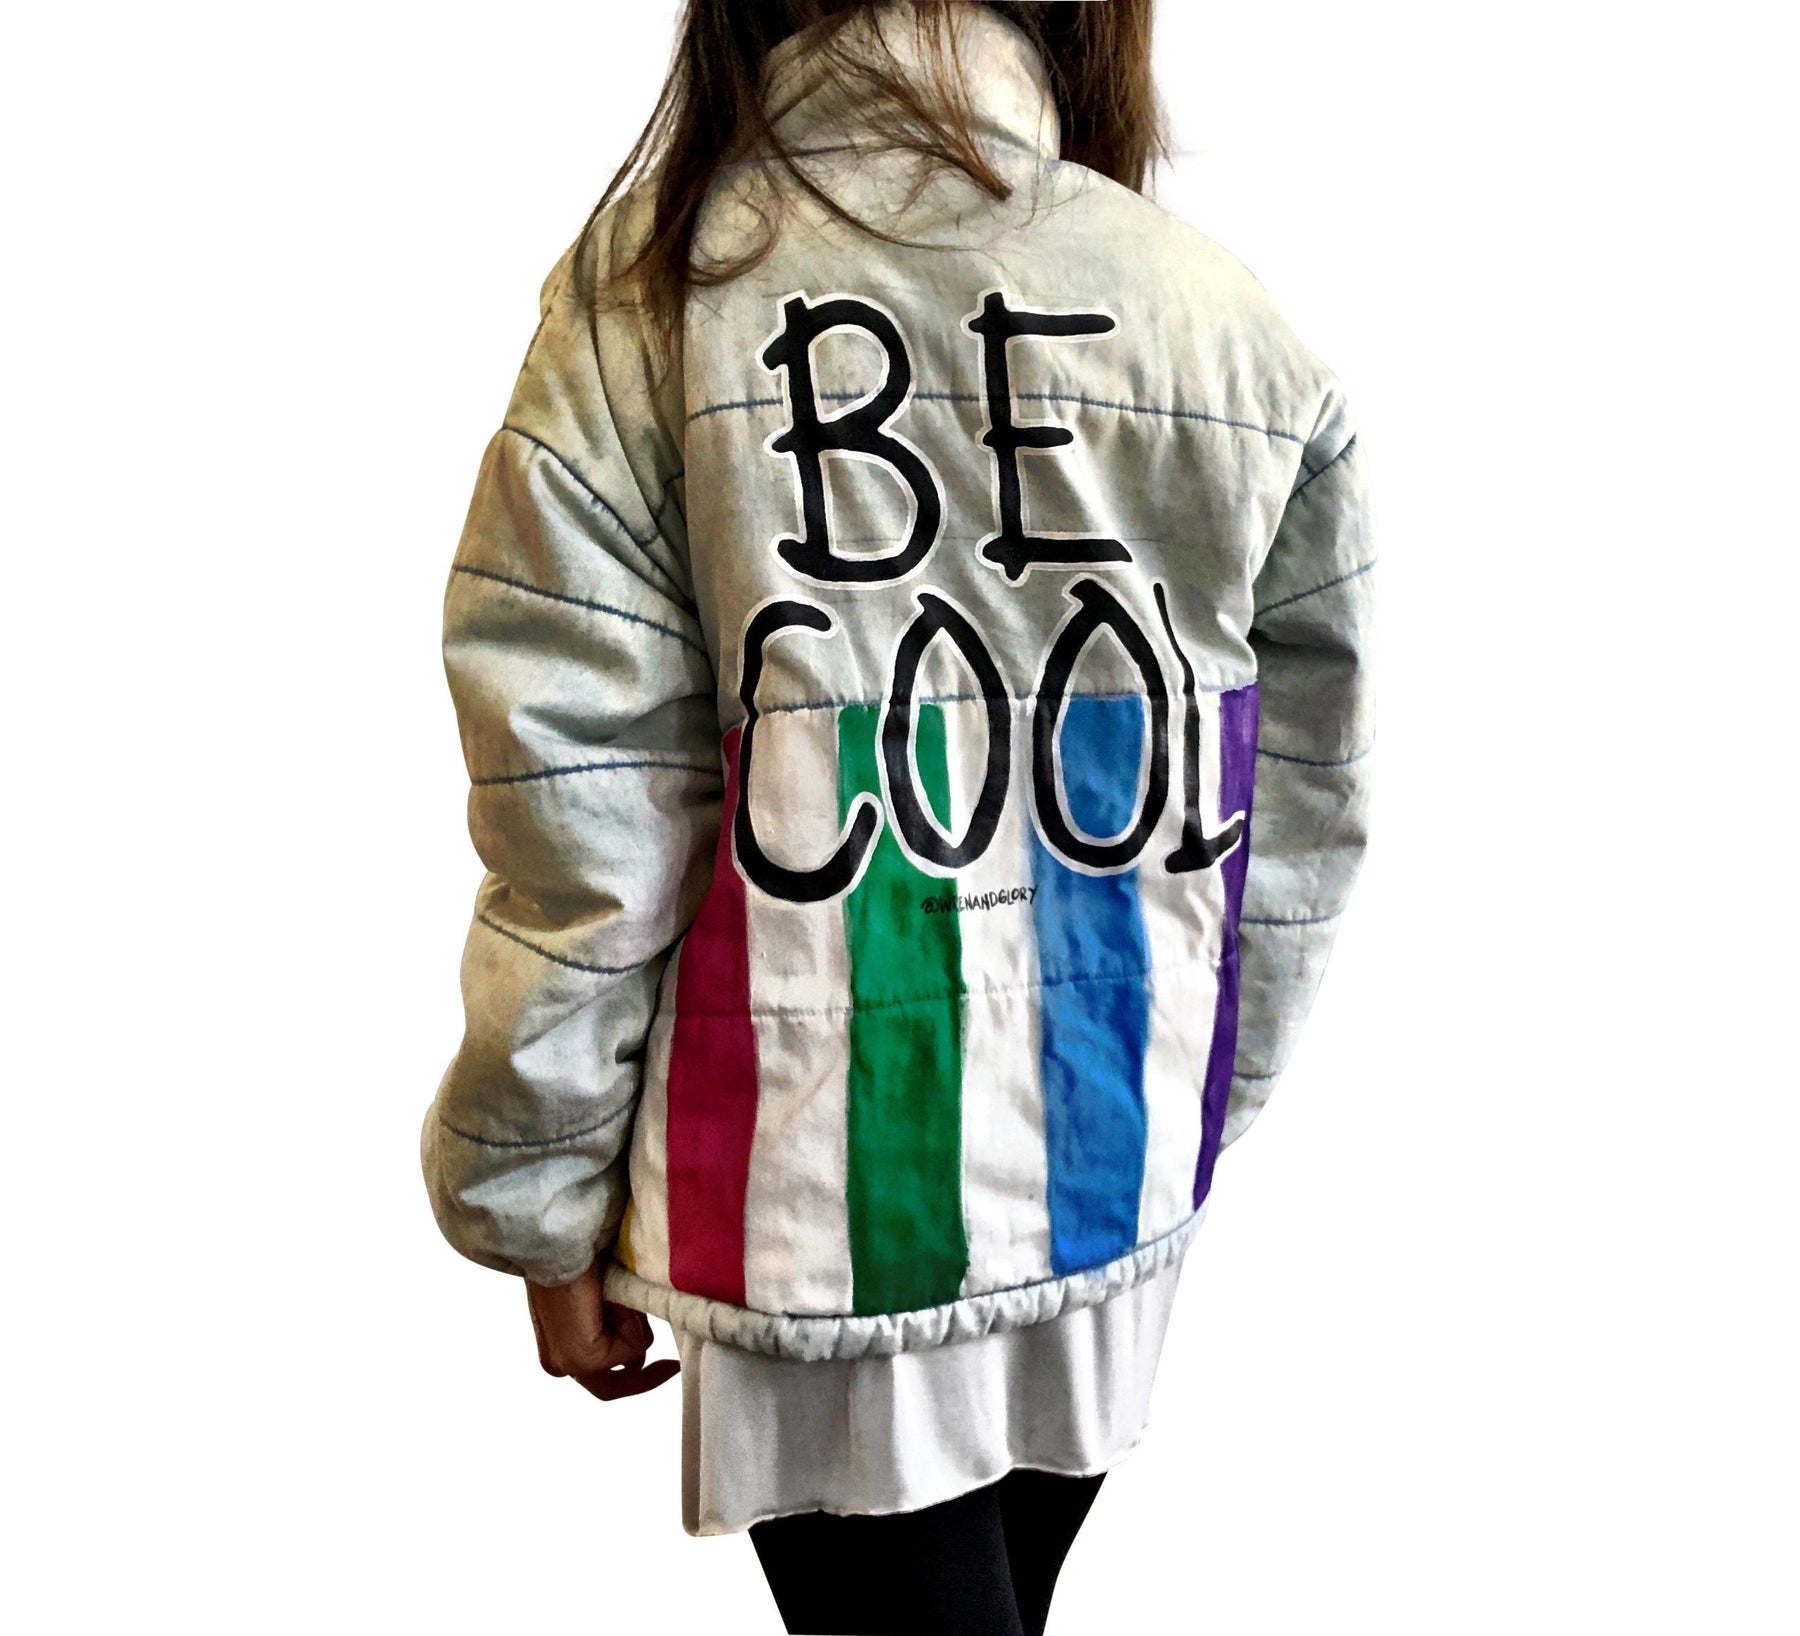 Perfect denim puffer jacket. Rainbow colors painted all across bottom, with BE COOL painted on large on back. Signed @wrenandglory.